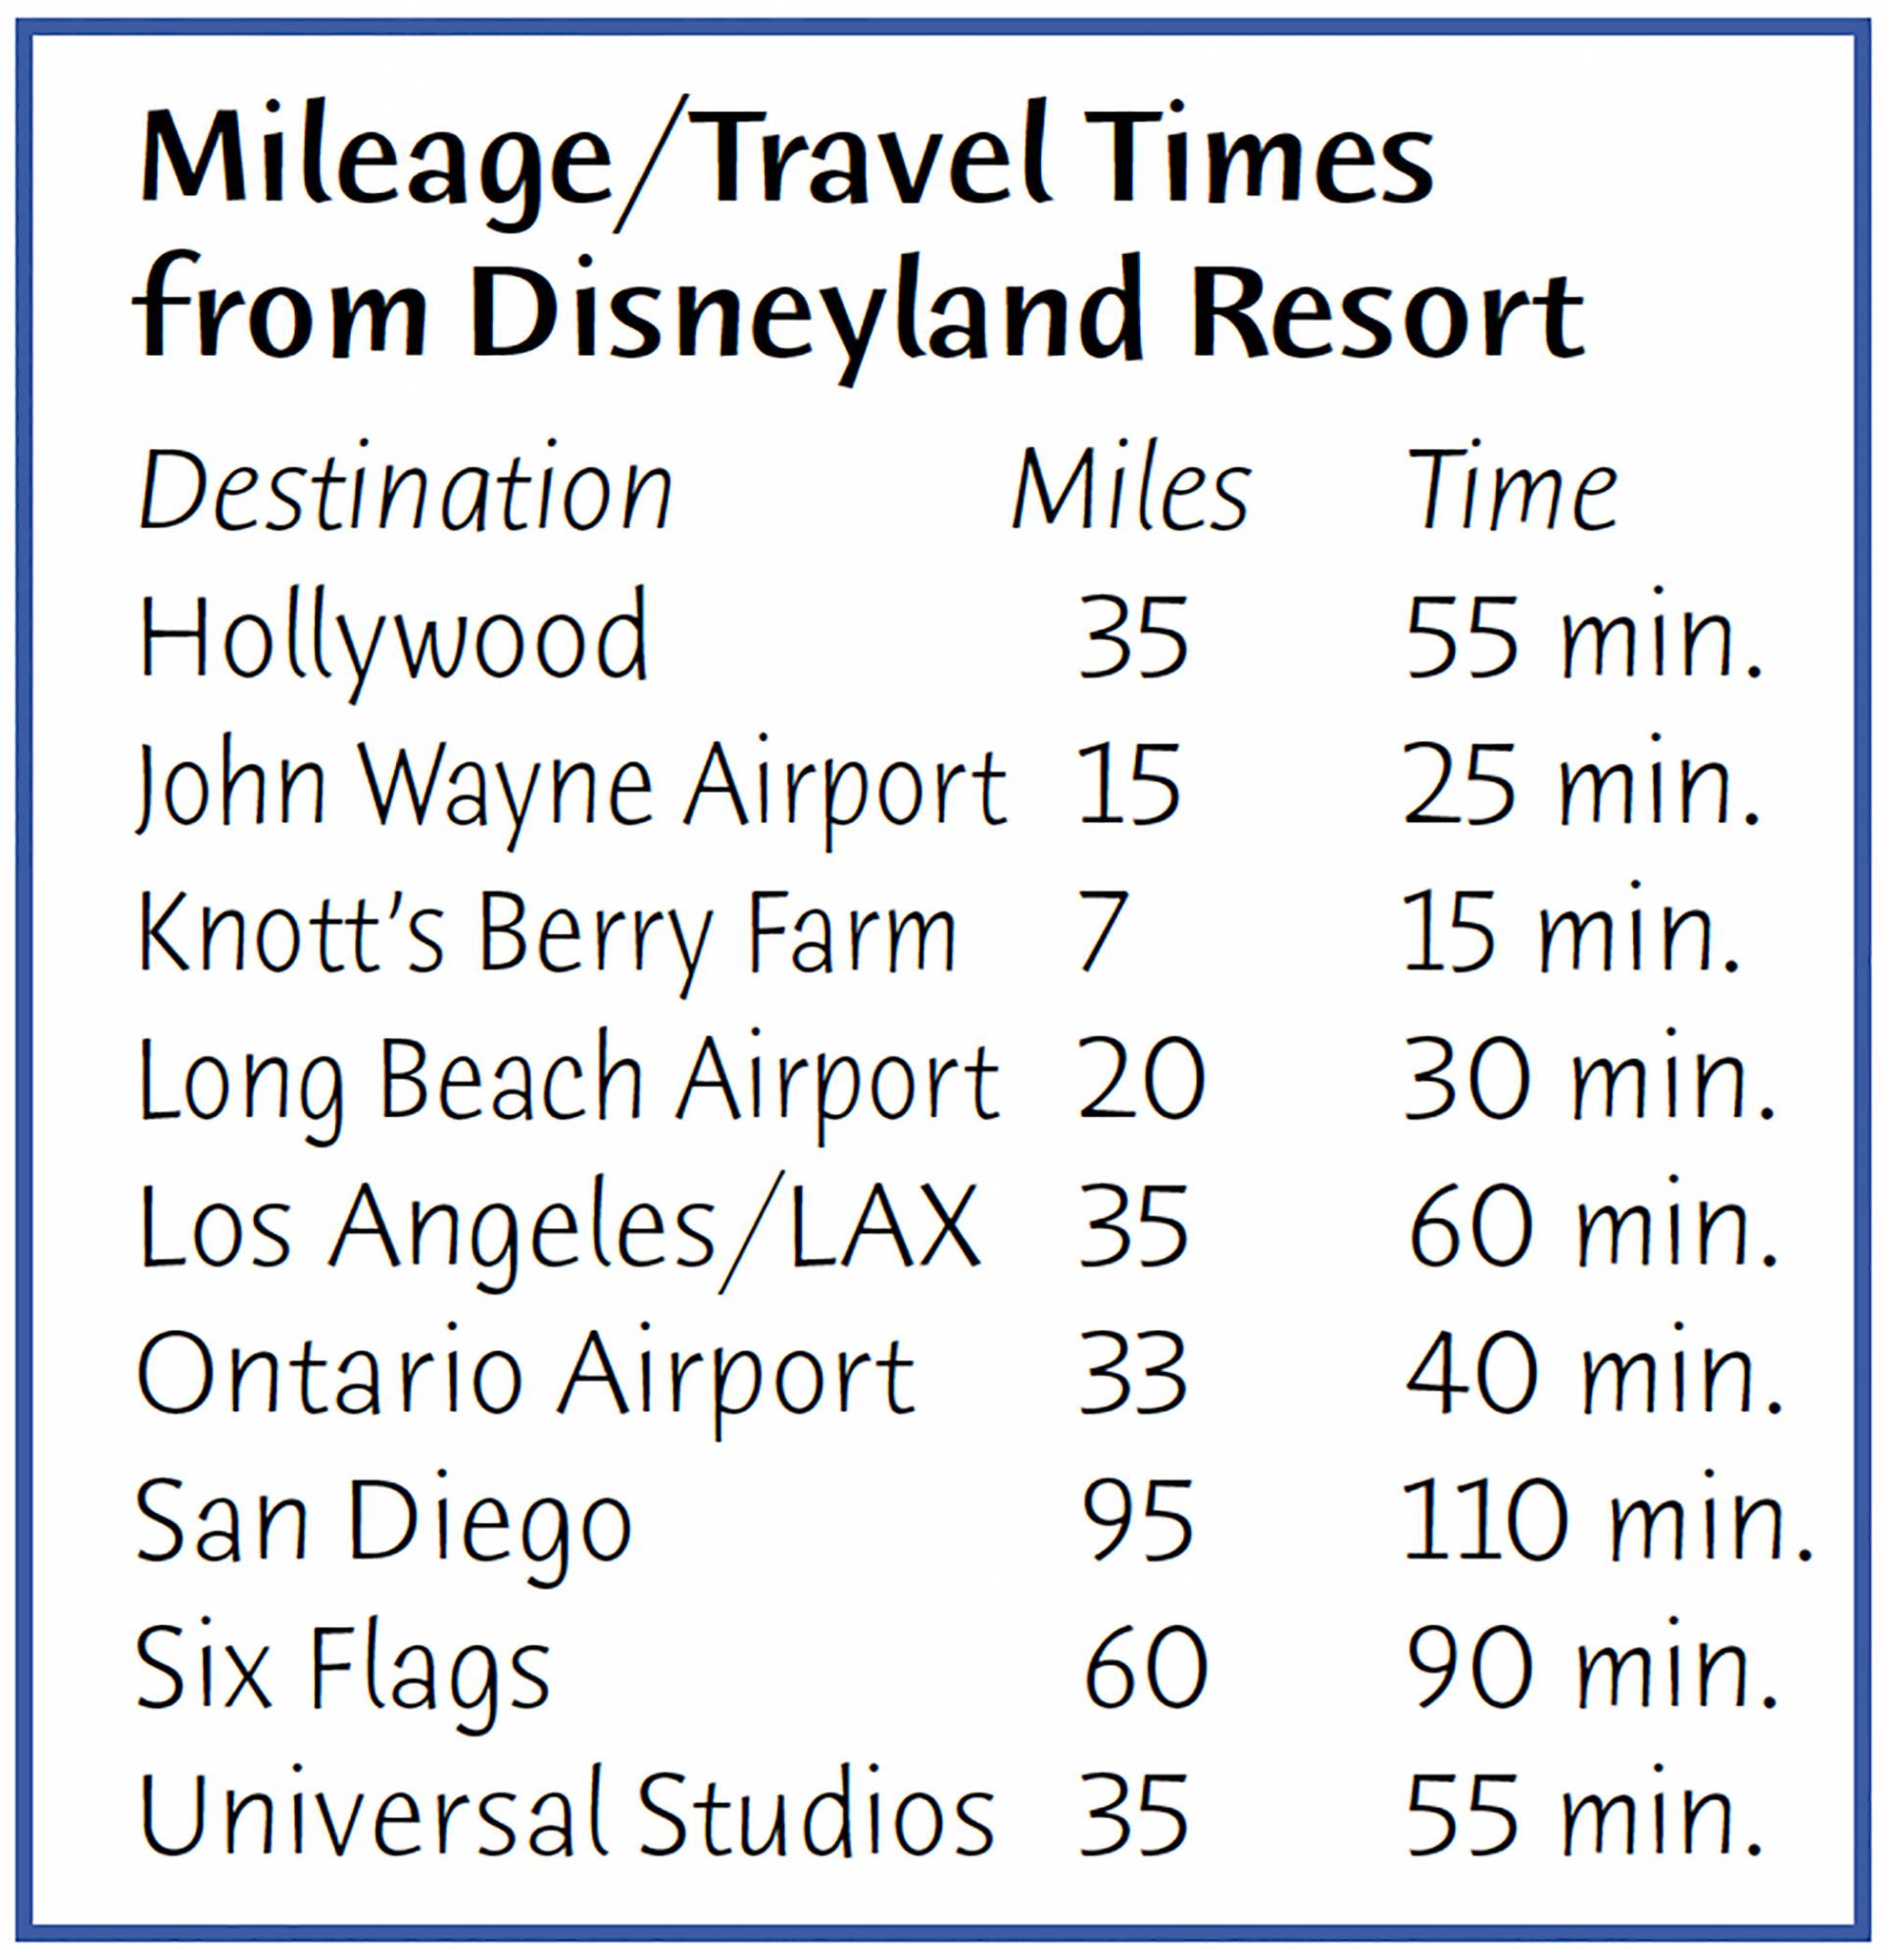 Mileage Times from Disneyland